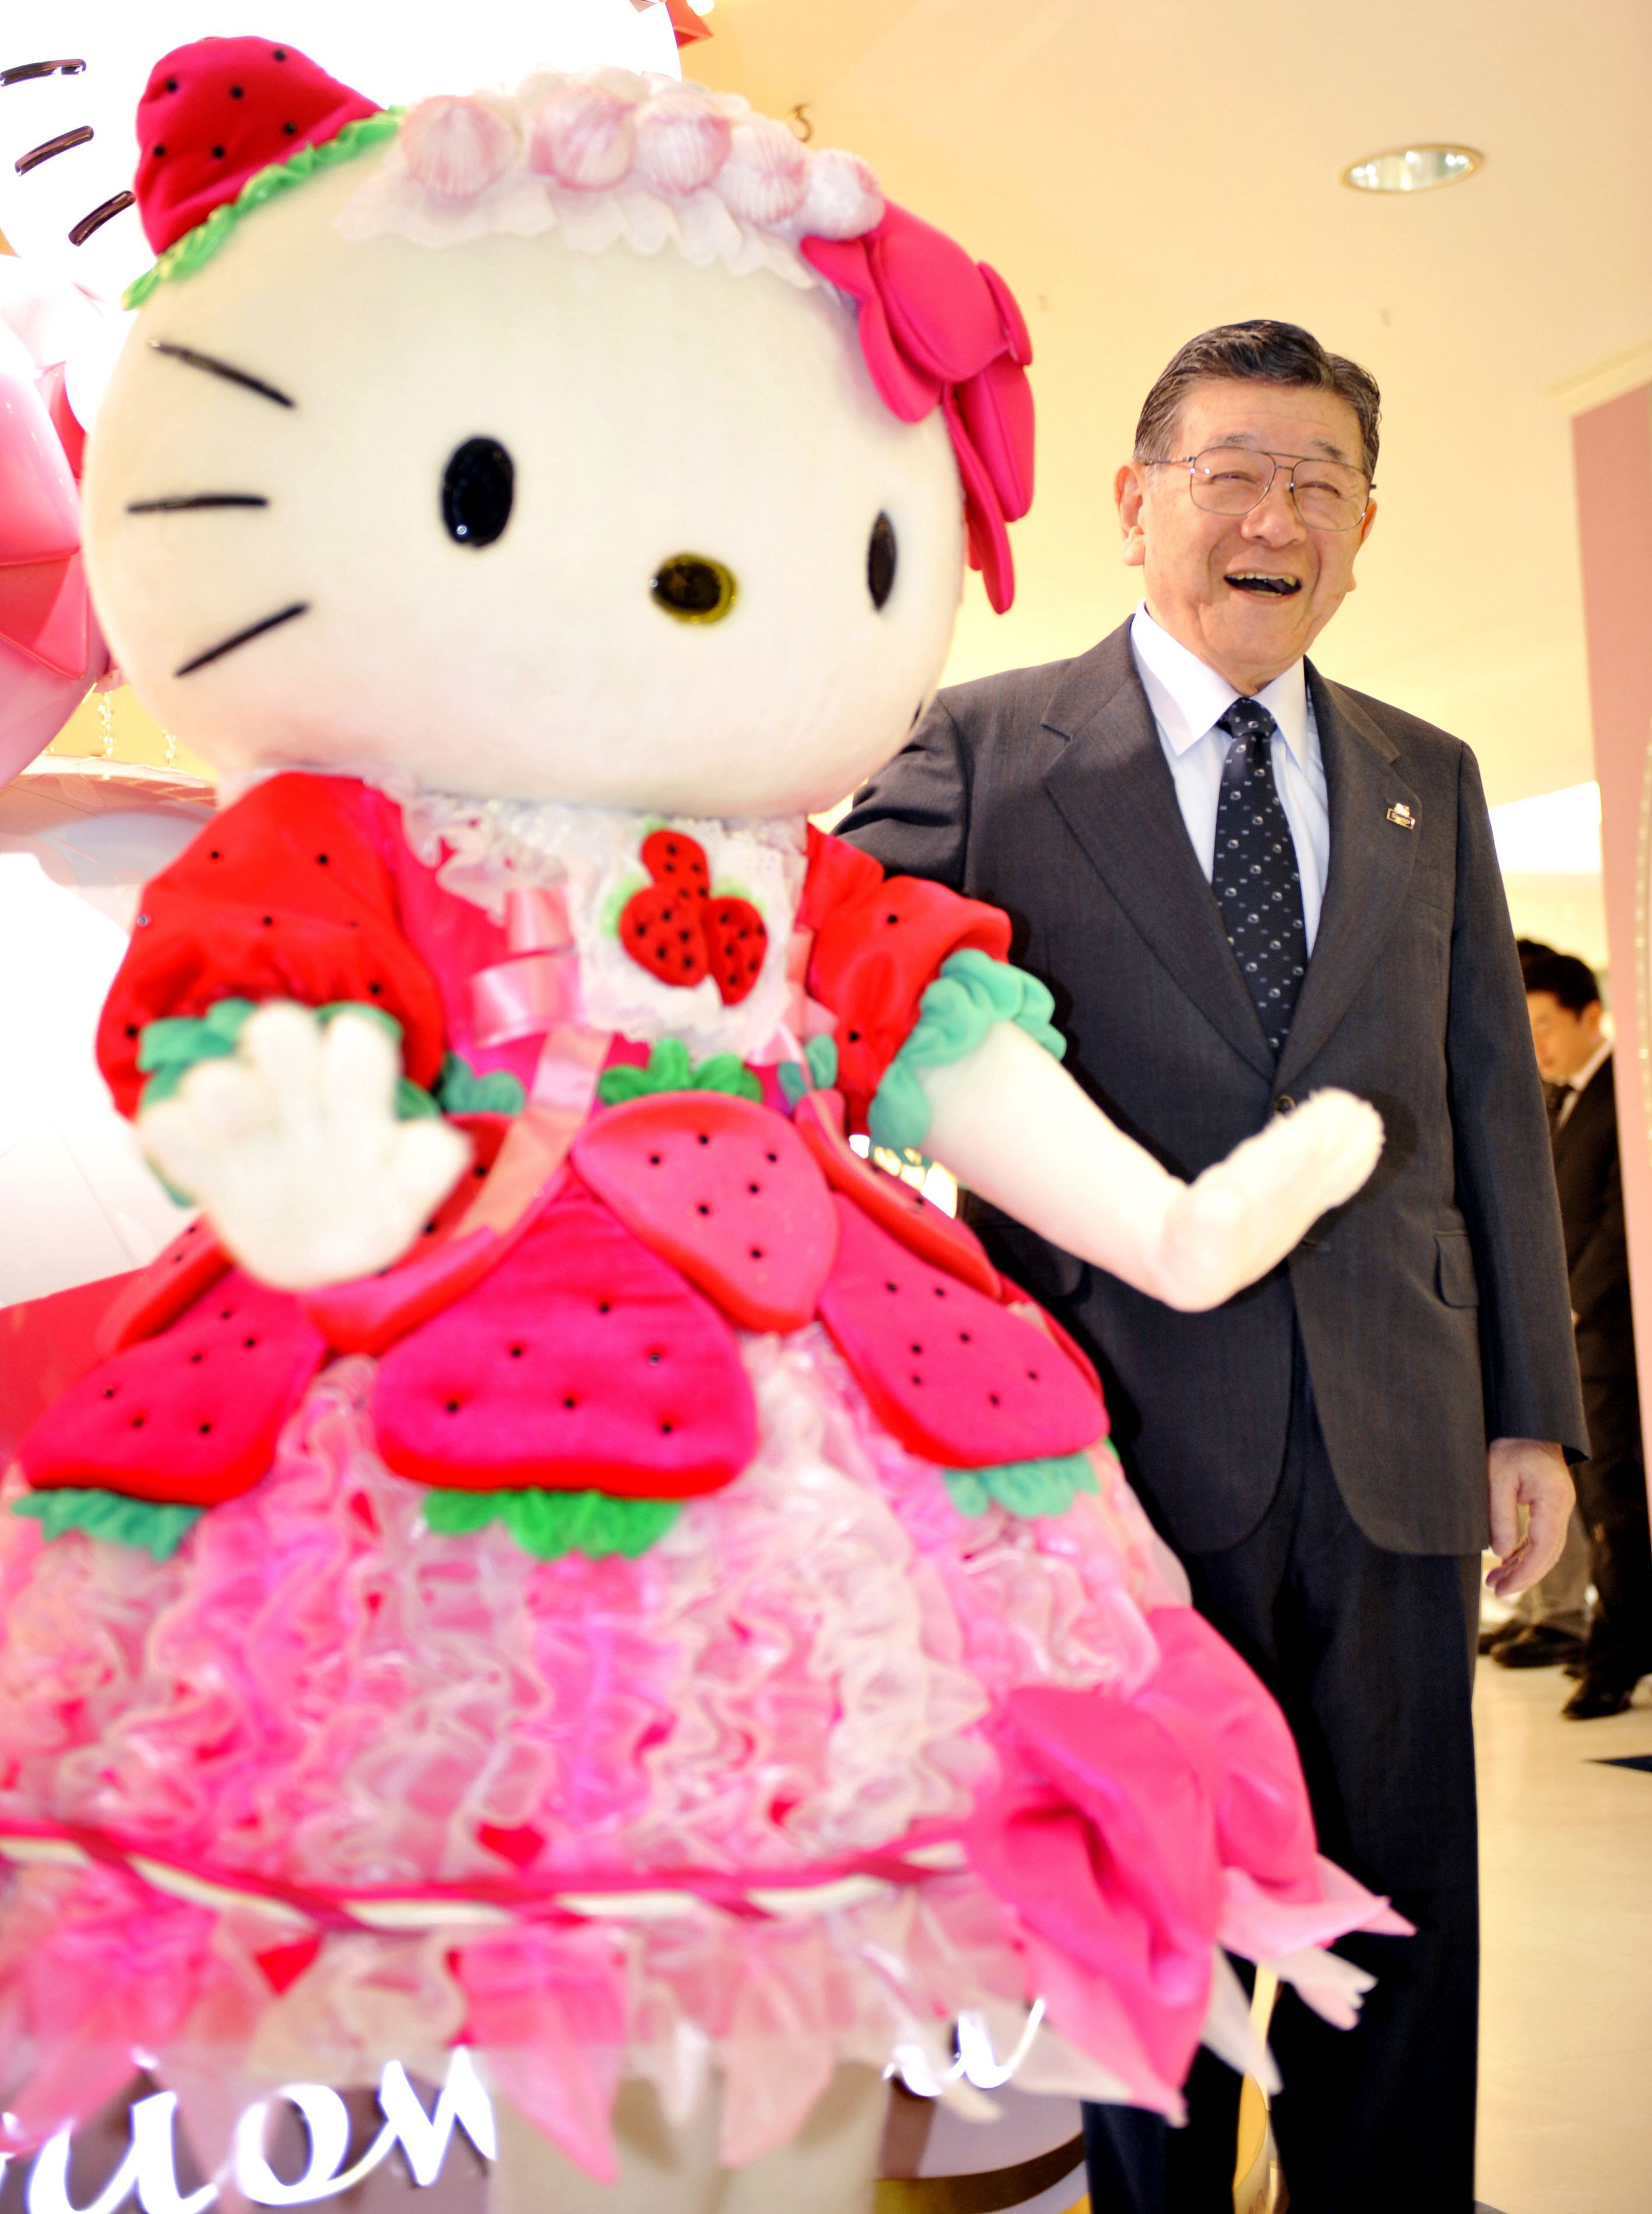  In this file photo taken on October 29, 2009 president of Japanese character business giant Sanrio, Shintaro Tsuji (R), smiles as he poses with character Hello Kitty (L) as the company opens the world's largest Sanrio shop in Tokyo. Credit: AFP